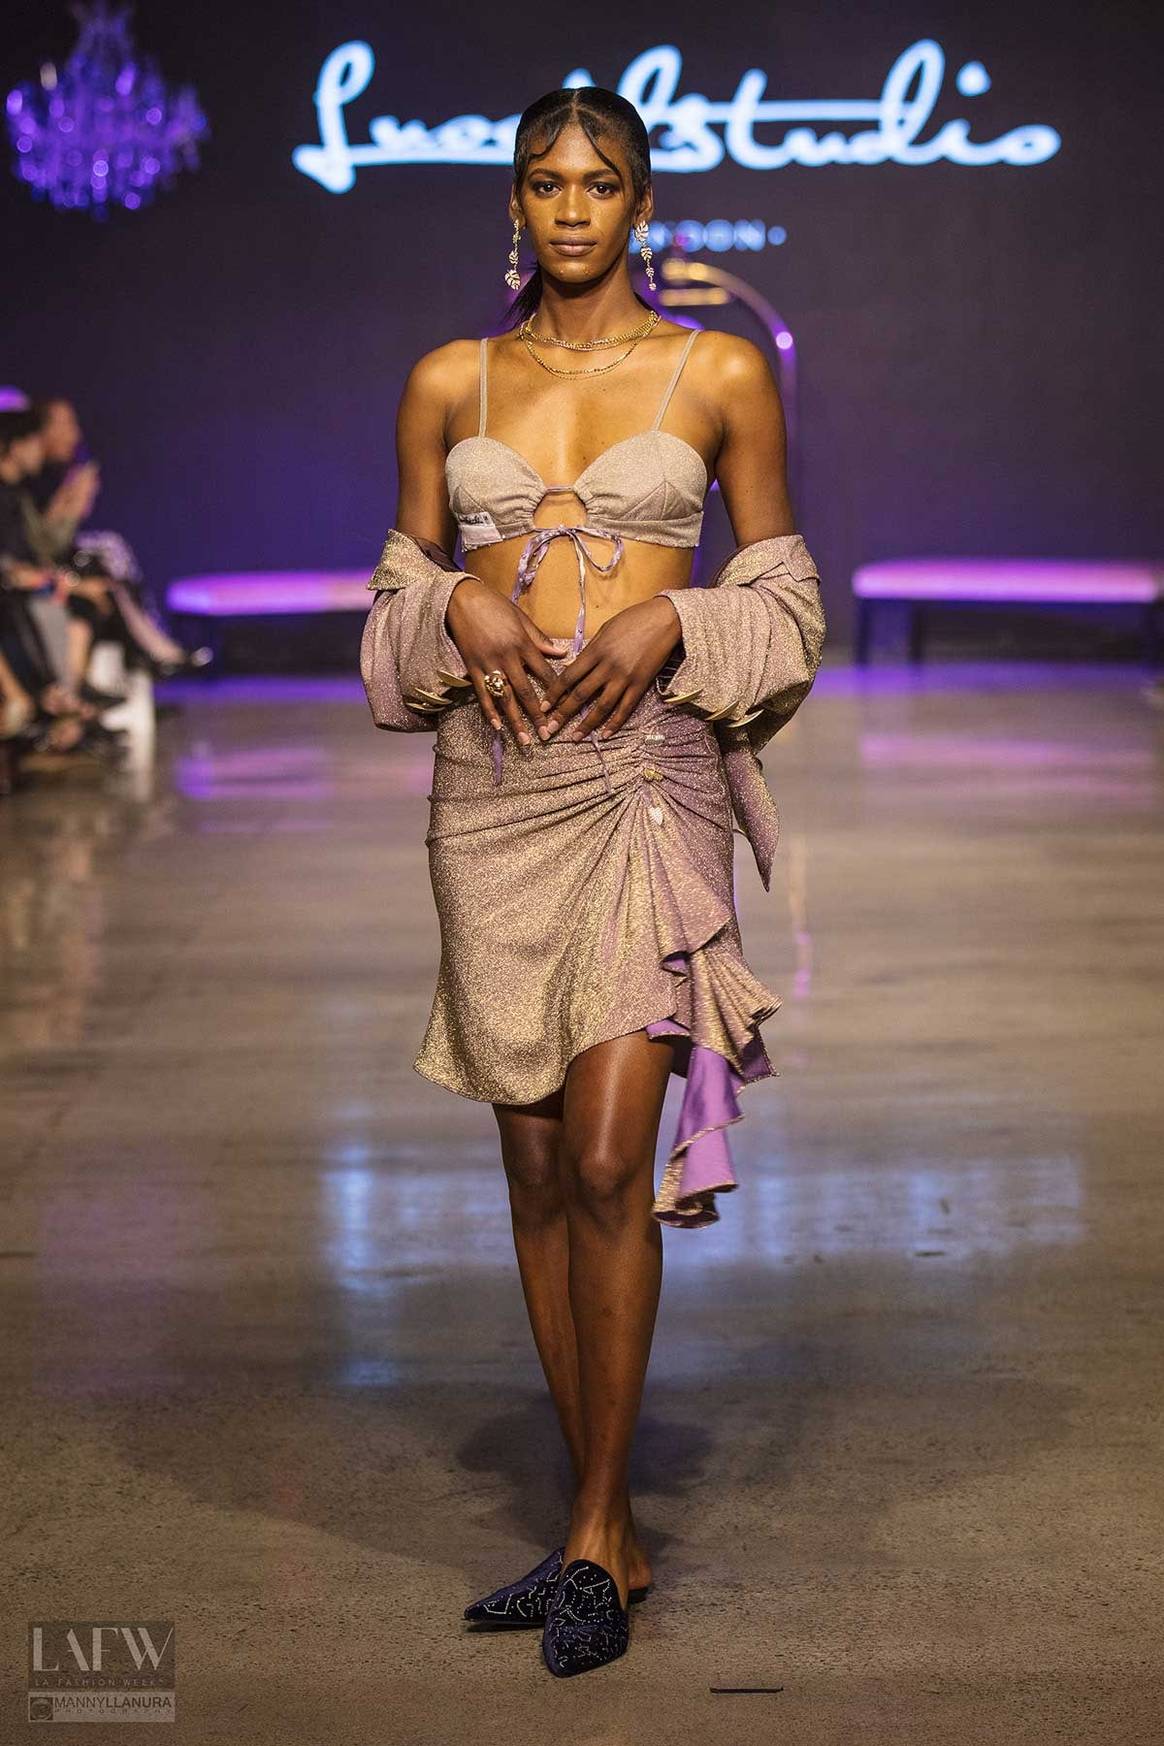 LAFW SS20: Luooifstudio in pictures